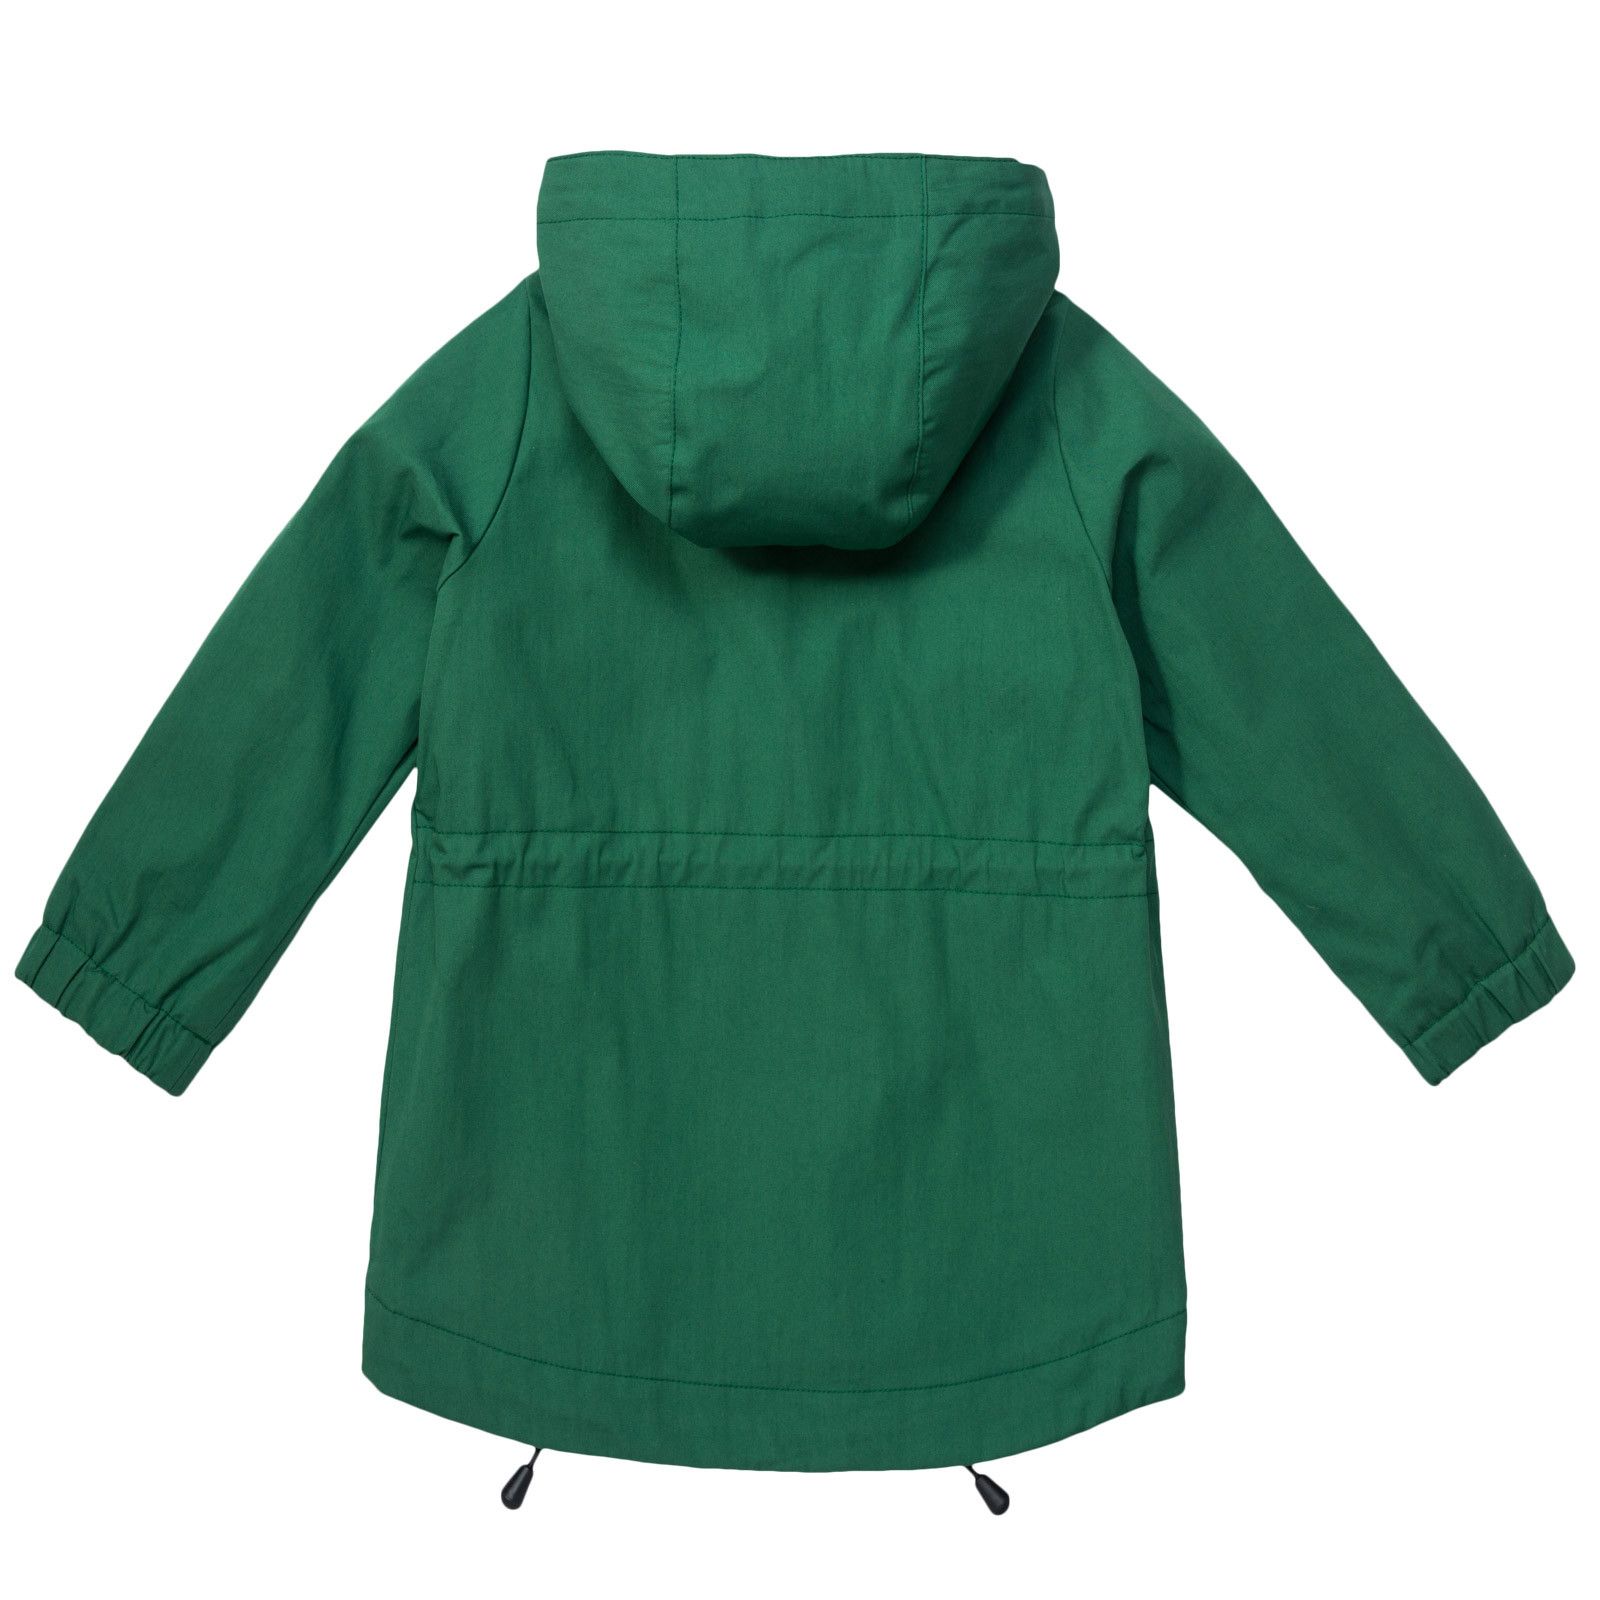 Boys Green Hooded Coat With Patch Pockets - CÉMAROSE | Children's Fashion Store - 2